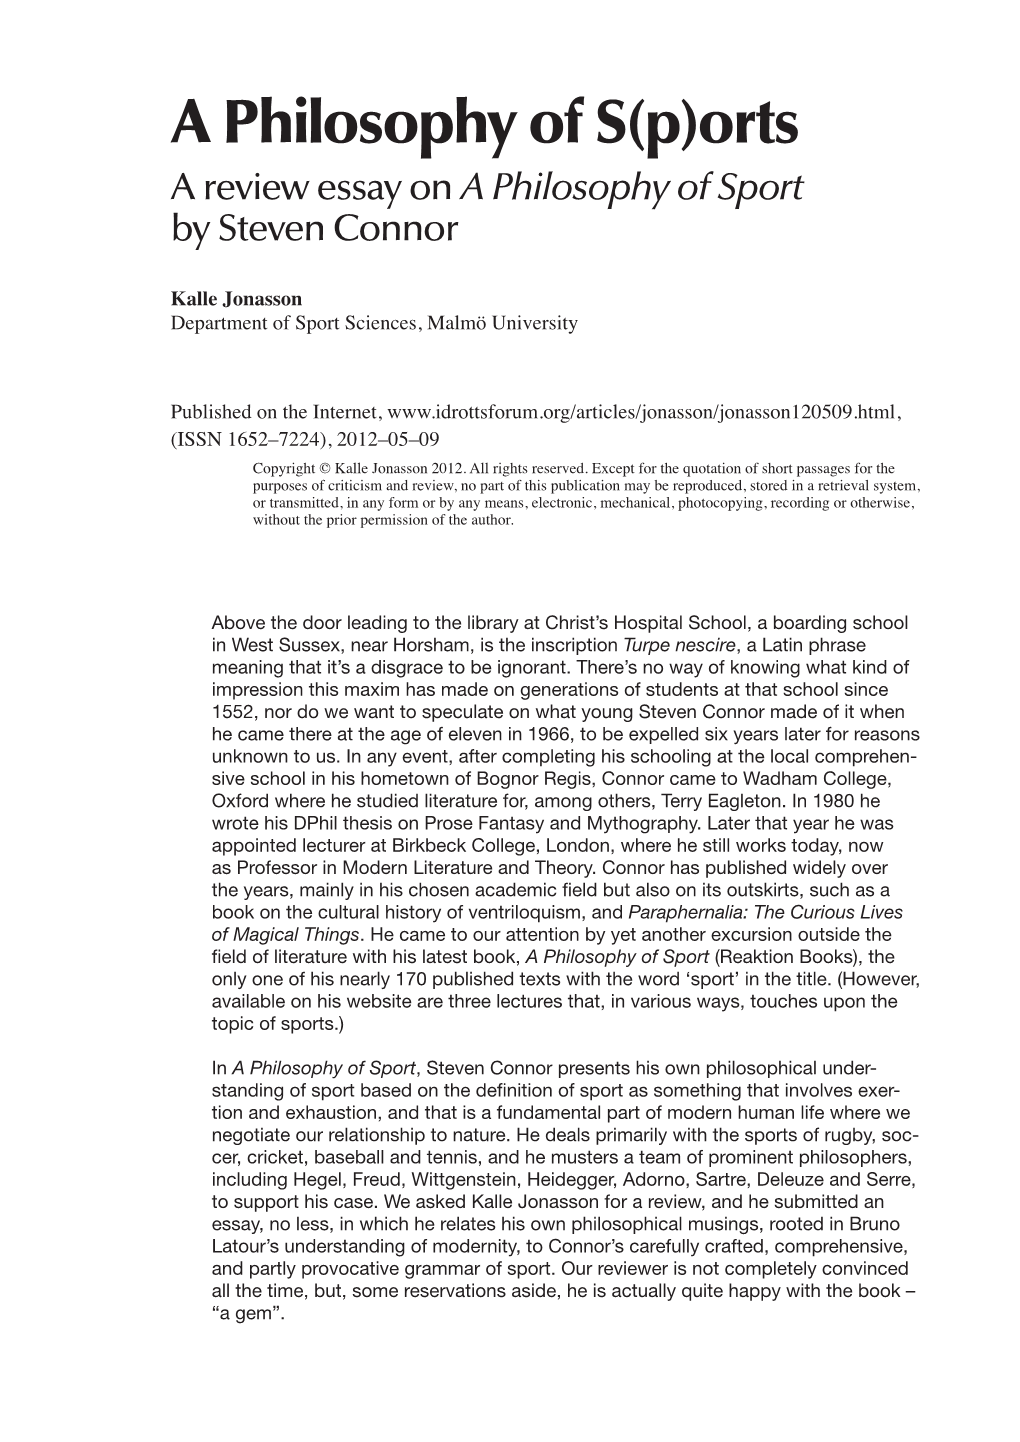 A Philosophy of S(P)Orts a Review Essay on a Philosophy of Sport by Steven Connor